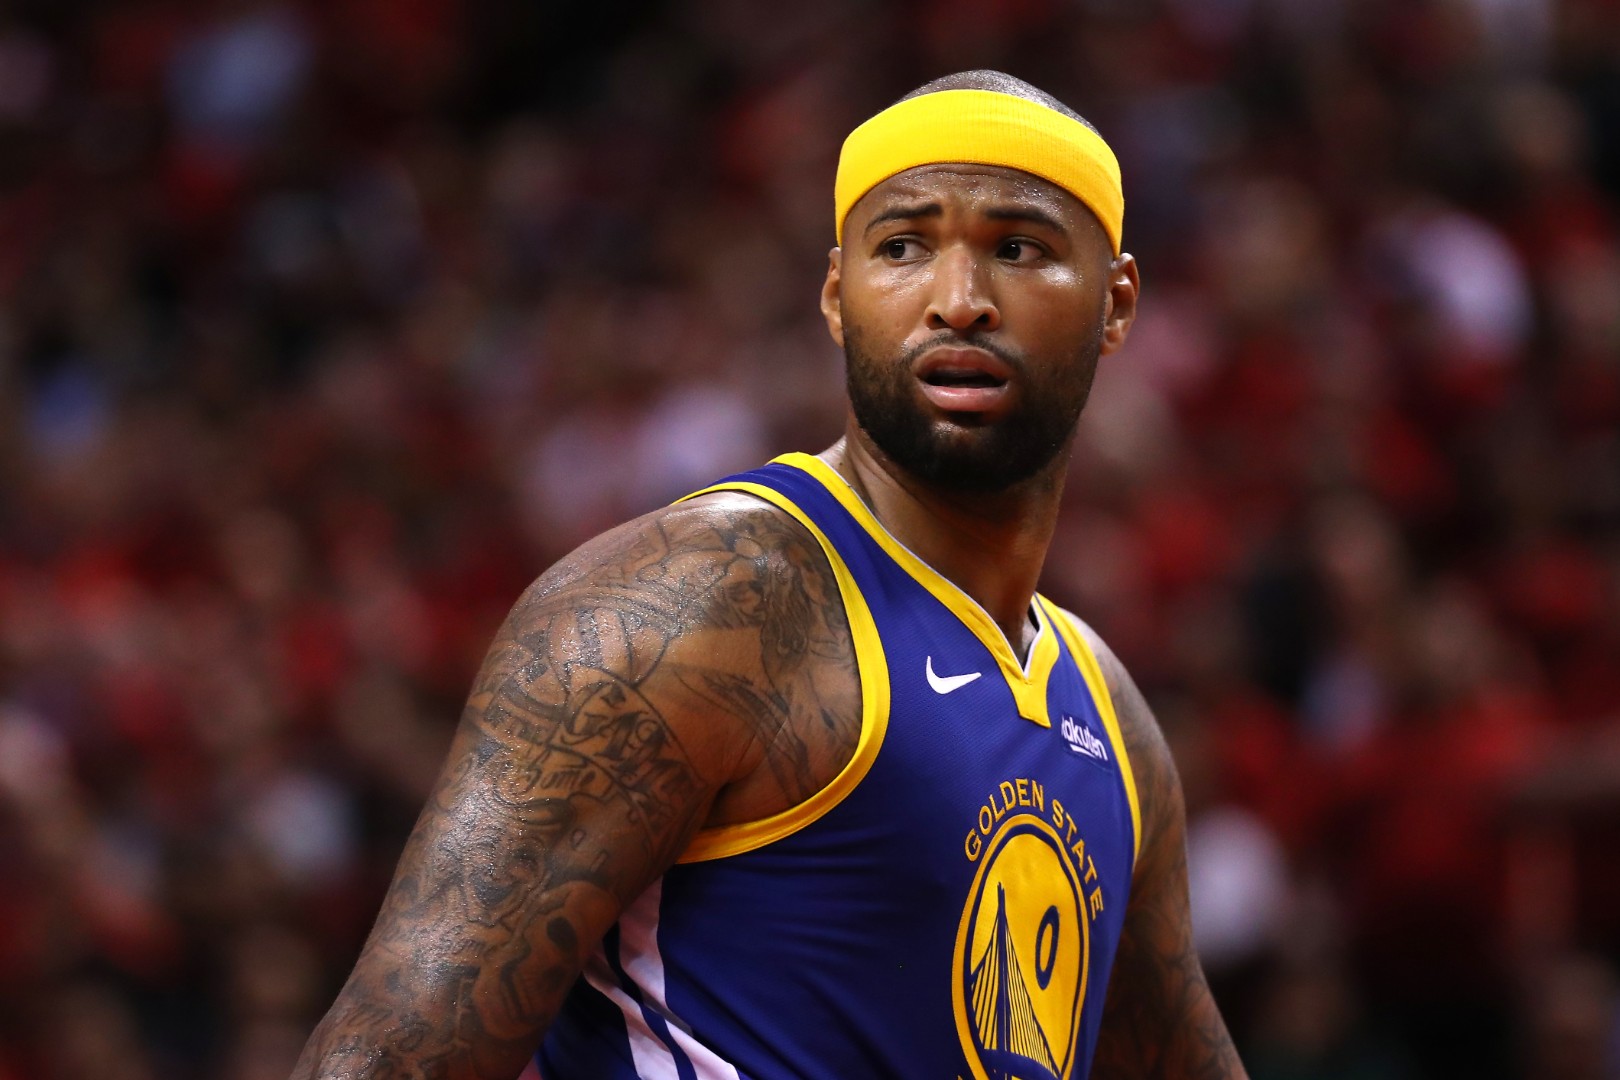 After battling injuries in recent years, DeMarcus Cousins has reportedly agreed to join the Houston Rockets.